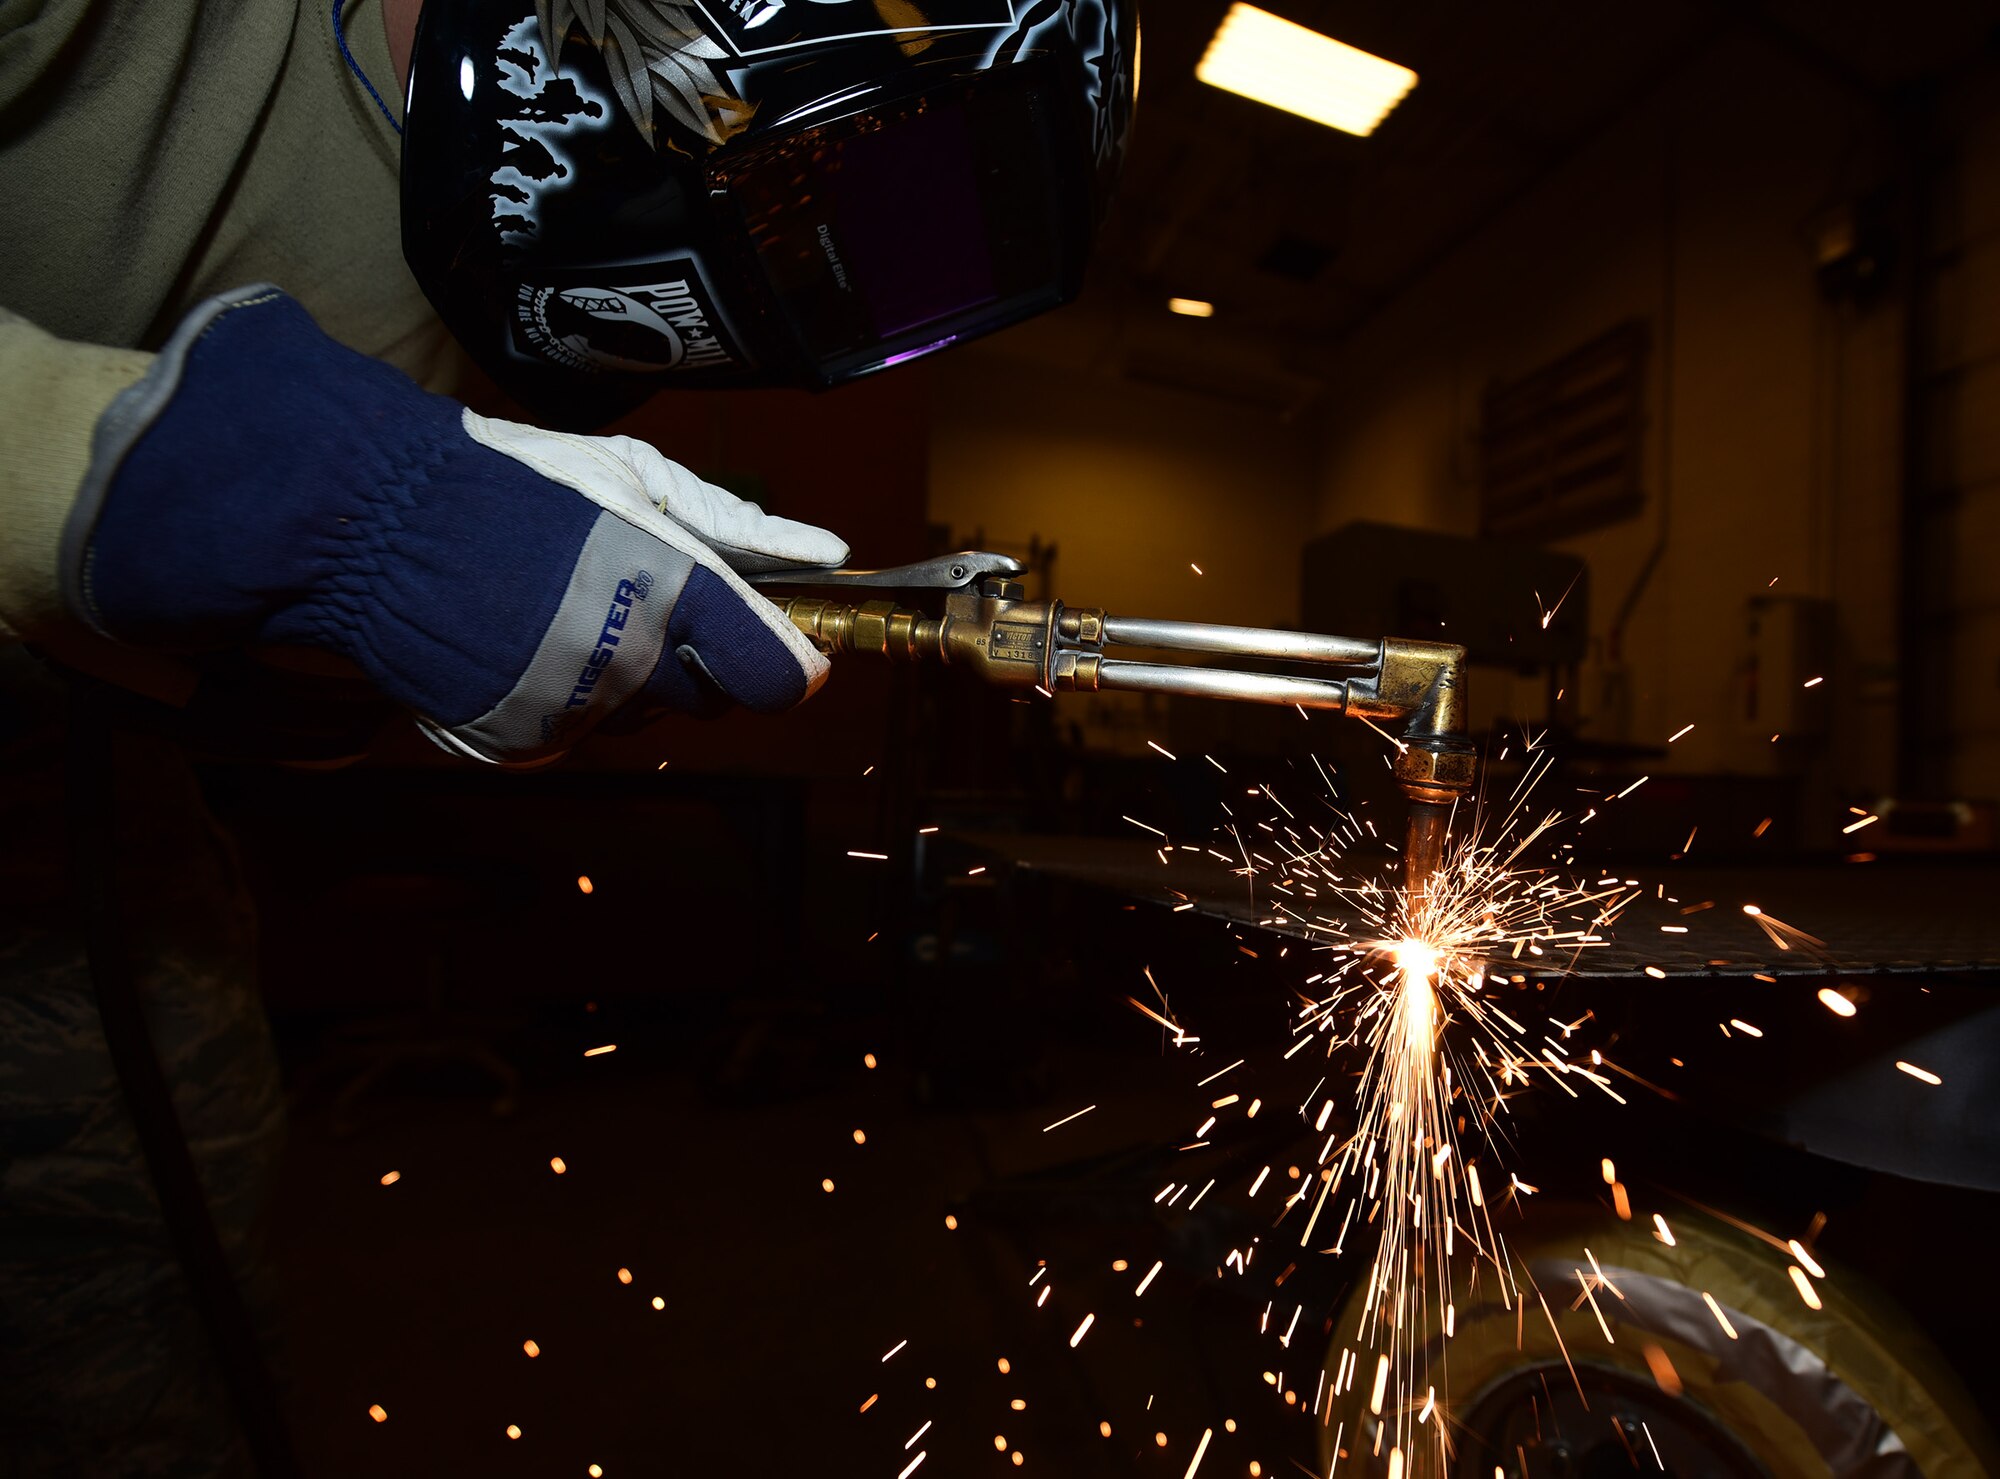 Senior Airman Kyle Eberhart, an aircraft metals technology journeyman assigned to the 28th Maintenance Squadron, torches through a piece of diamond plate sheet metal for a munitions trailer at Ellsworth Air Force Base, S.D., Oct. 27, 2016.  Mandatory safety equipment, such as flame resistant gloves, long pants and a welding mask, must be worn to protect against high temperatures and brightness from the torch. (U.S. Air Force photo by Airman 1st Class James L. Miller)